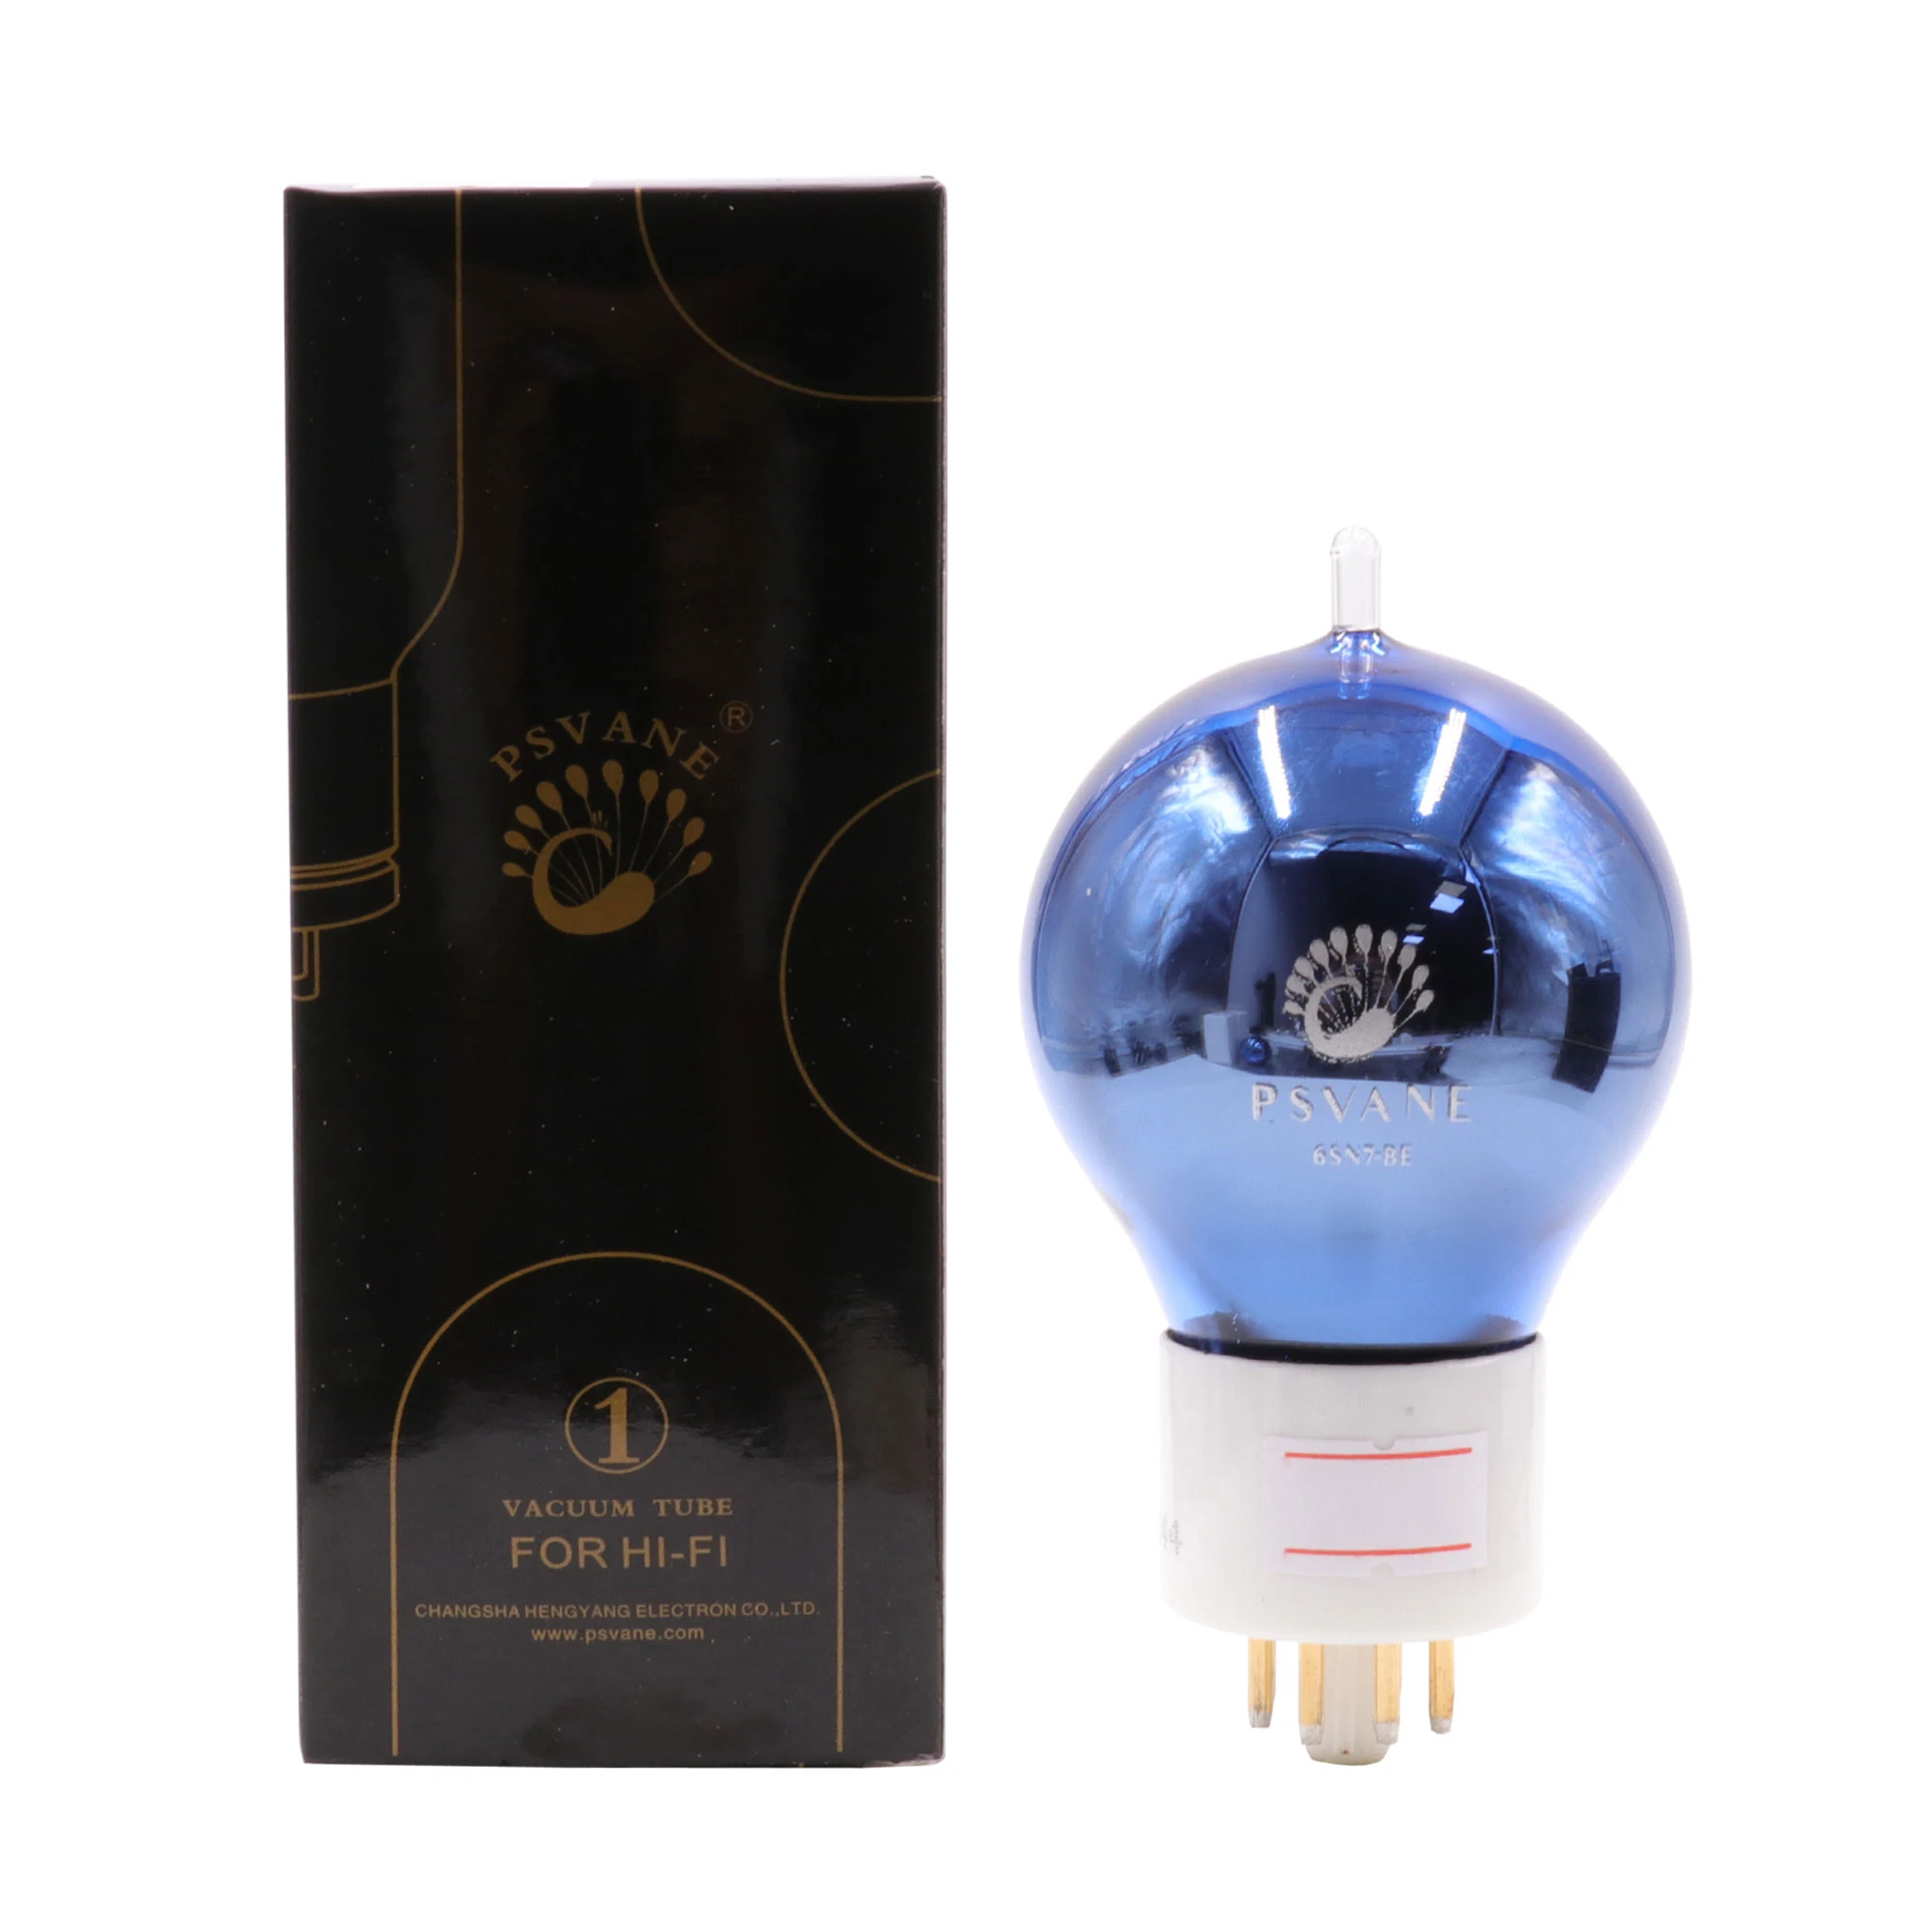 PSVANE 6SN7-BE Vacuum Tube Blue Glass shell Special Customize Version Plate Gold Pin Replace 6N8P 6H8C 6SN7 Matched Pair